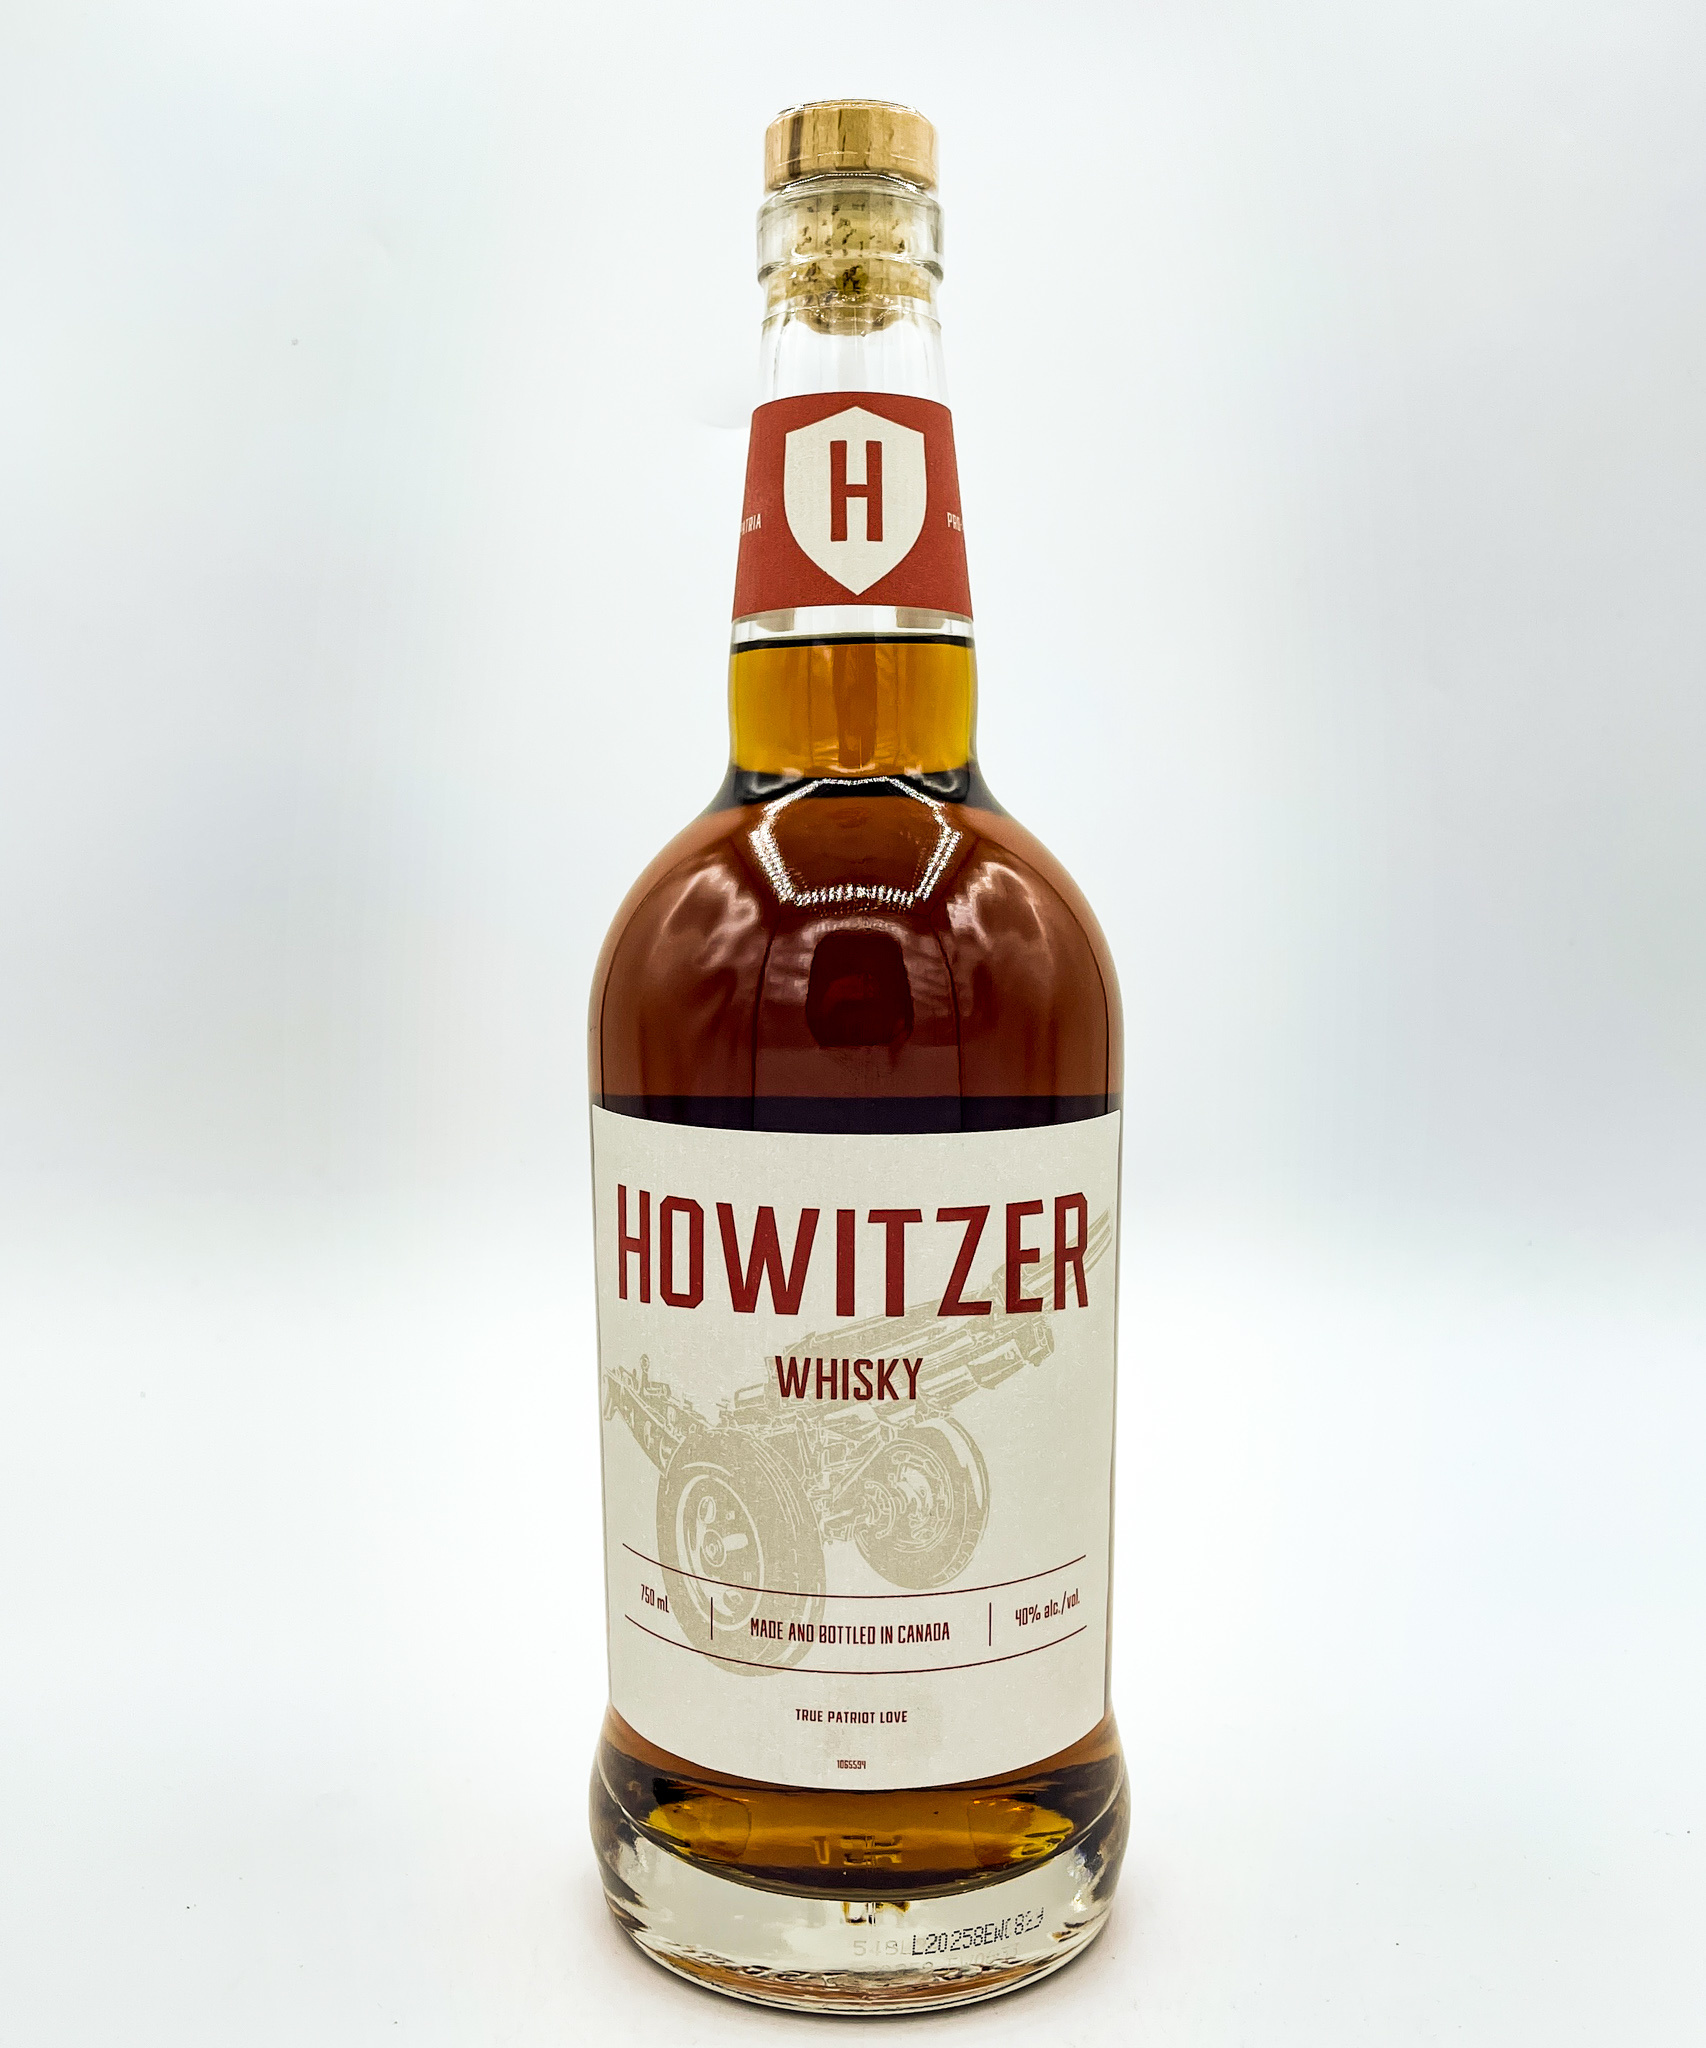 HOWITZER 5YR CORN WHISKY CANADA 750ML - Grapes & Grains